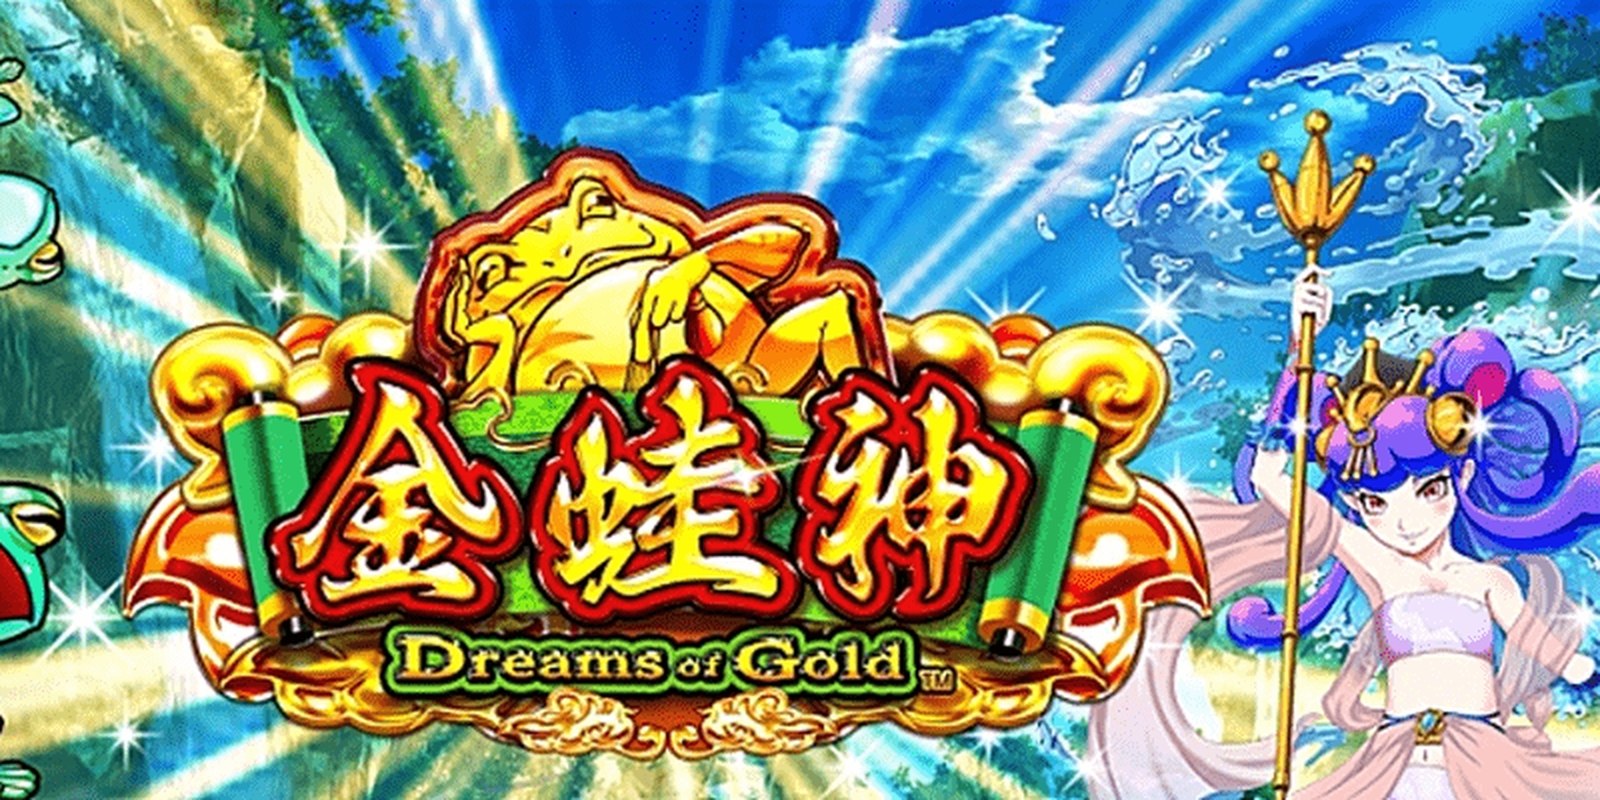 The Dreams of Gold Online Slot Demo Game by JTG